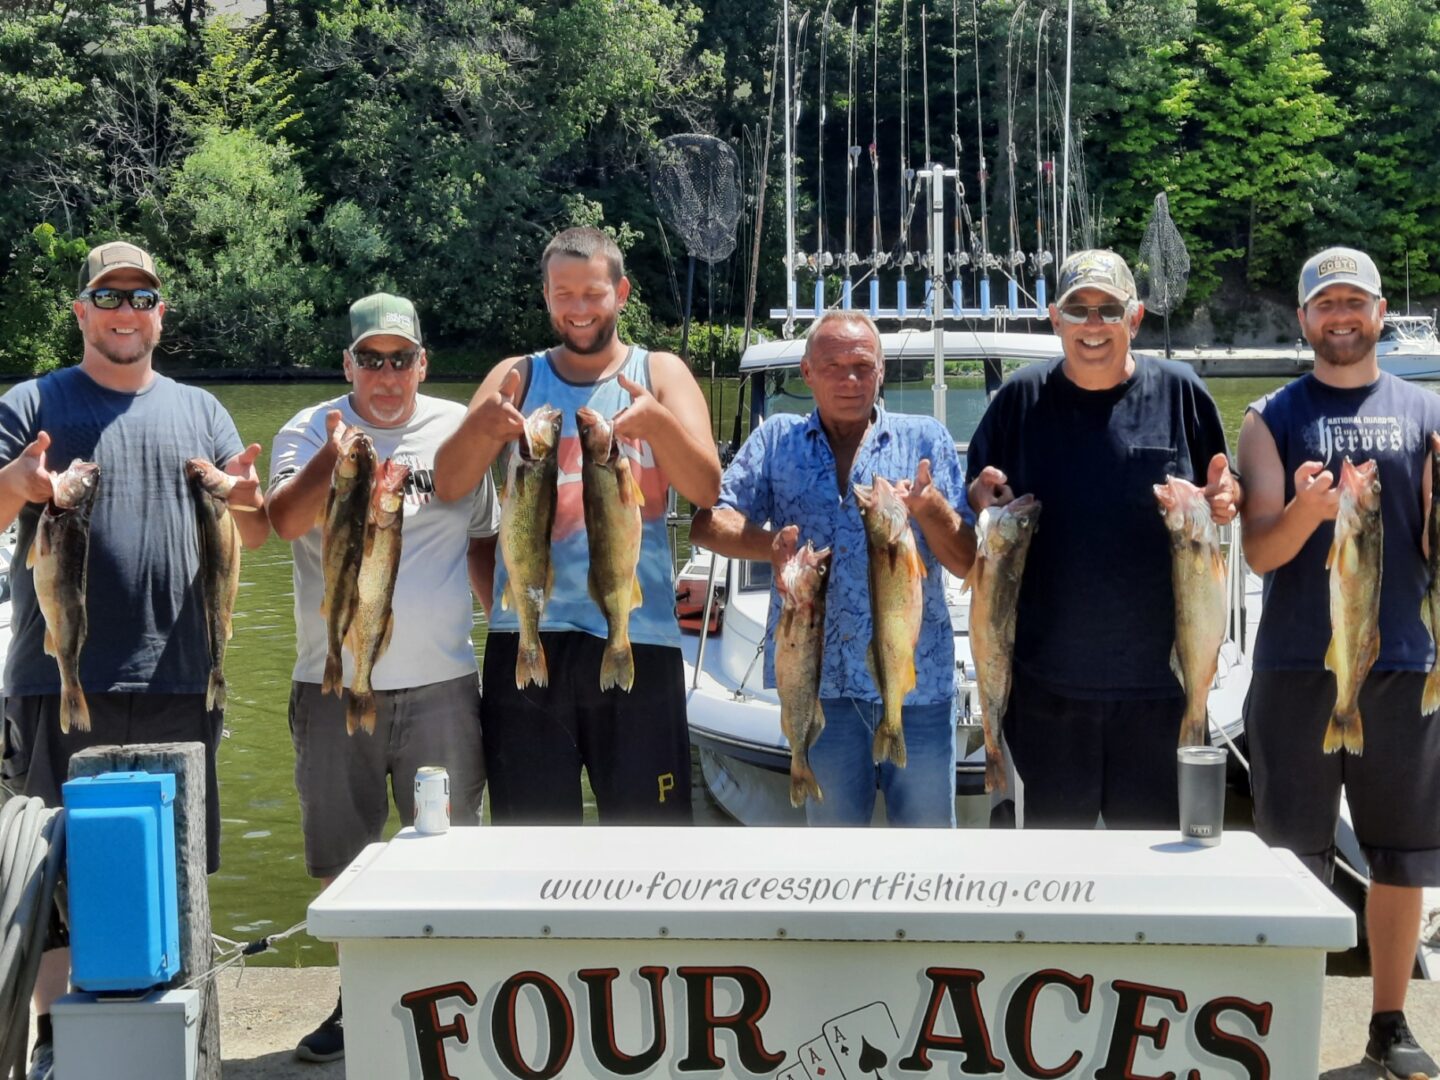 Six men showing the fish that they caught